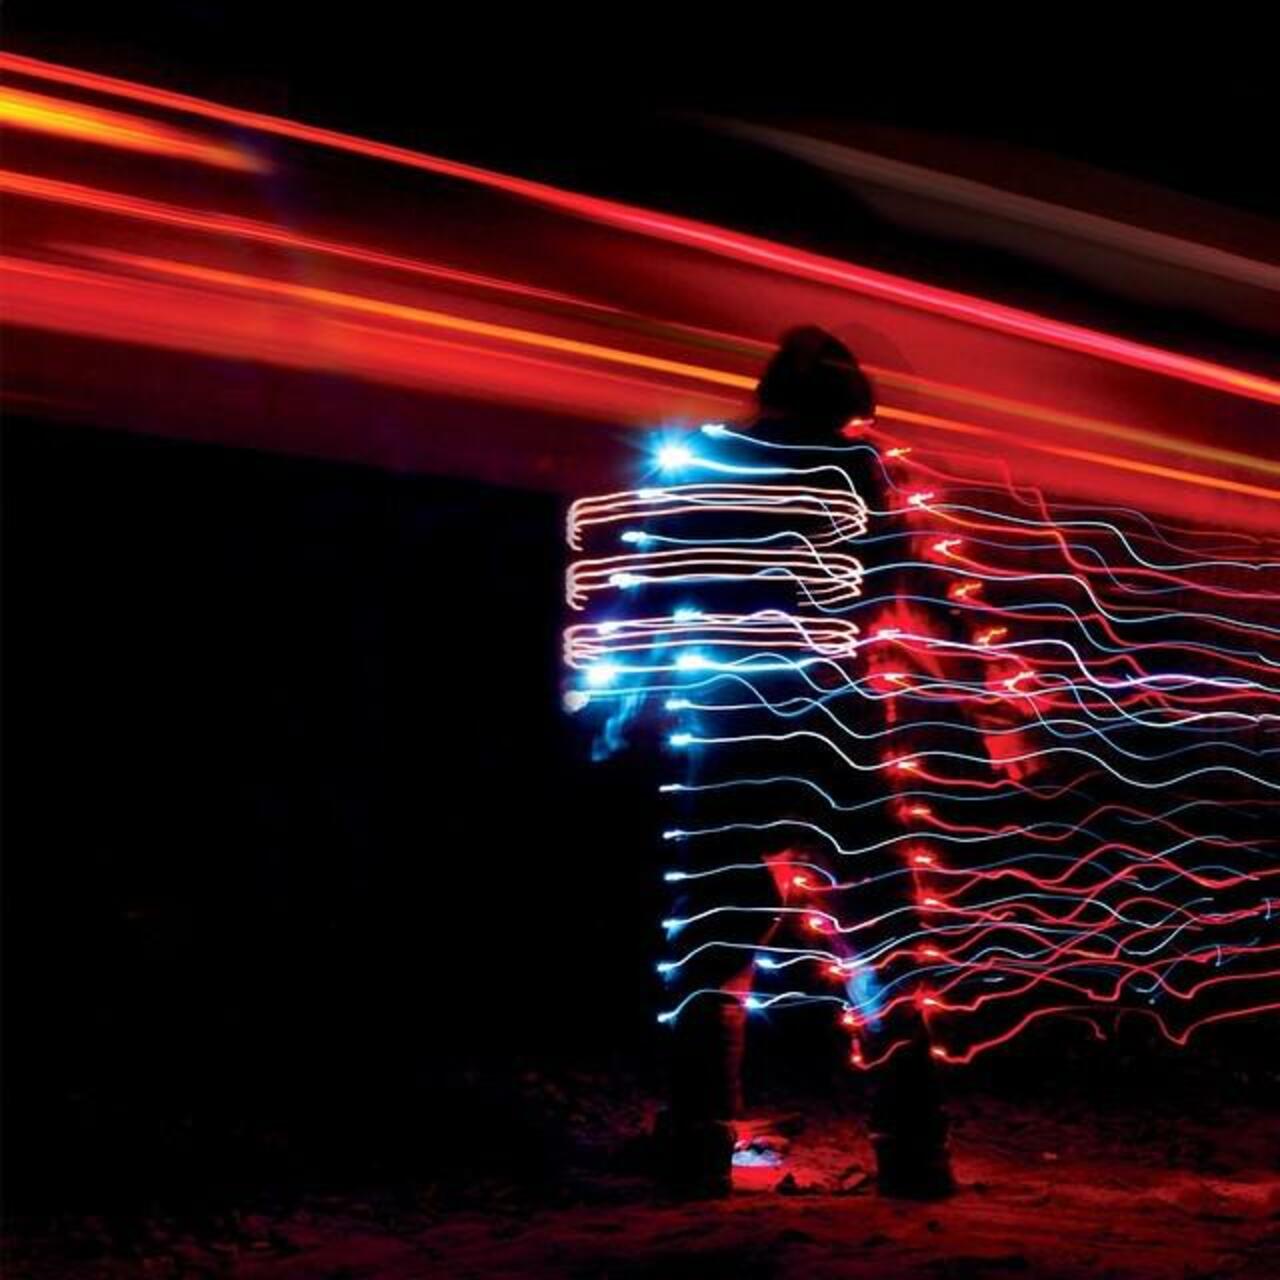 When the music grabs you  Photo by Dana Maltby  #lightart #stayinspired #intotheam http://t.co/TxuY3M6CpI